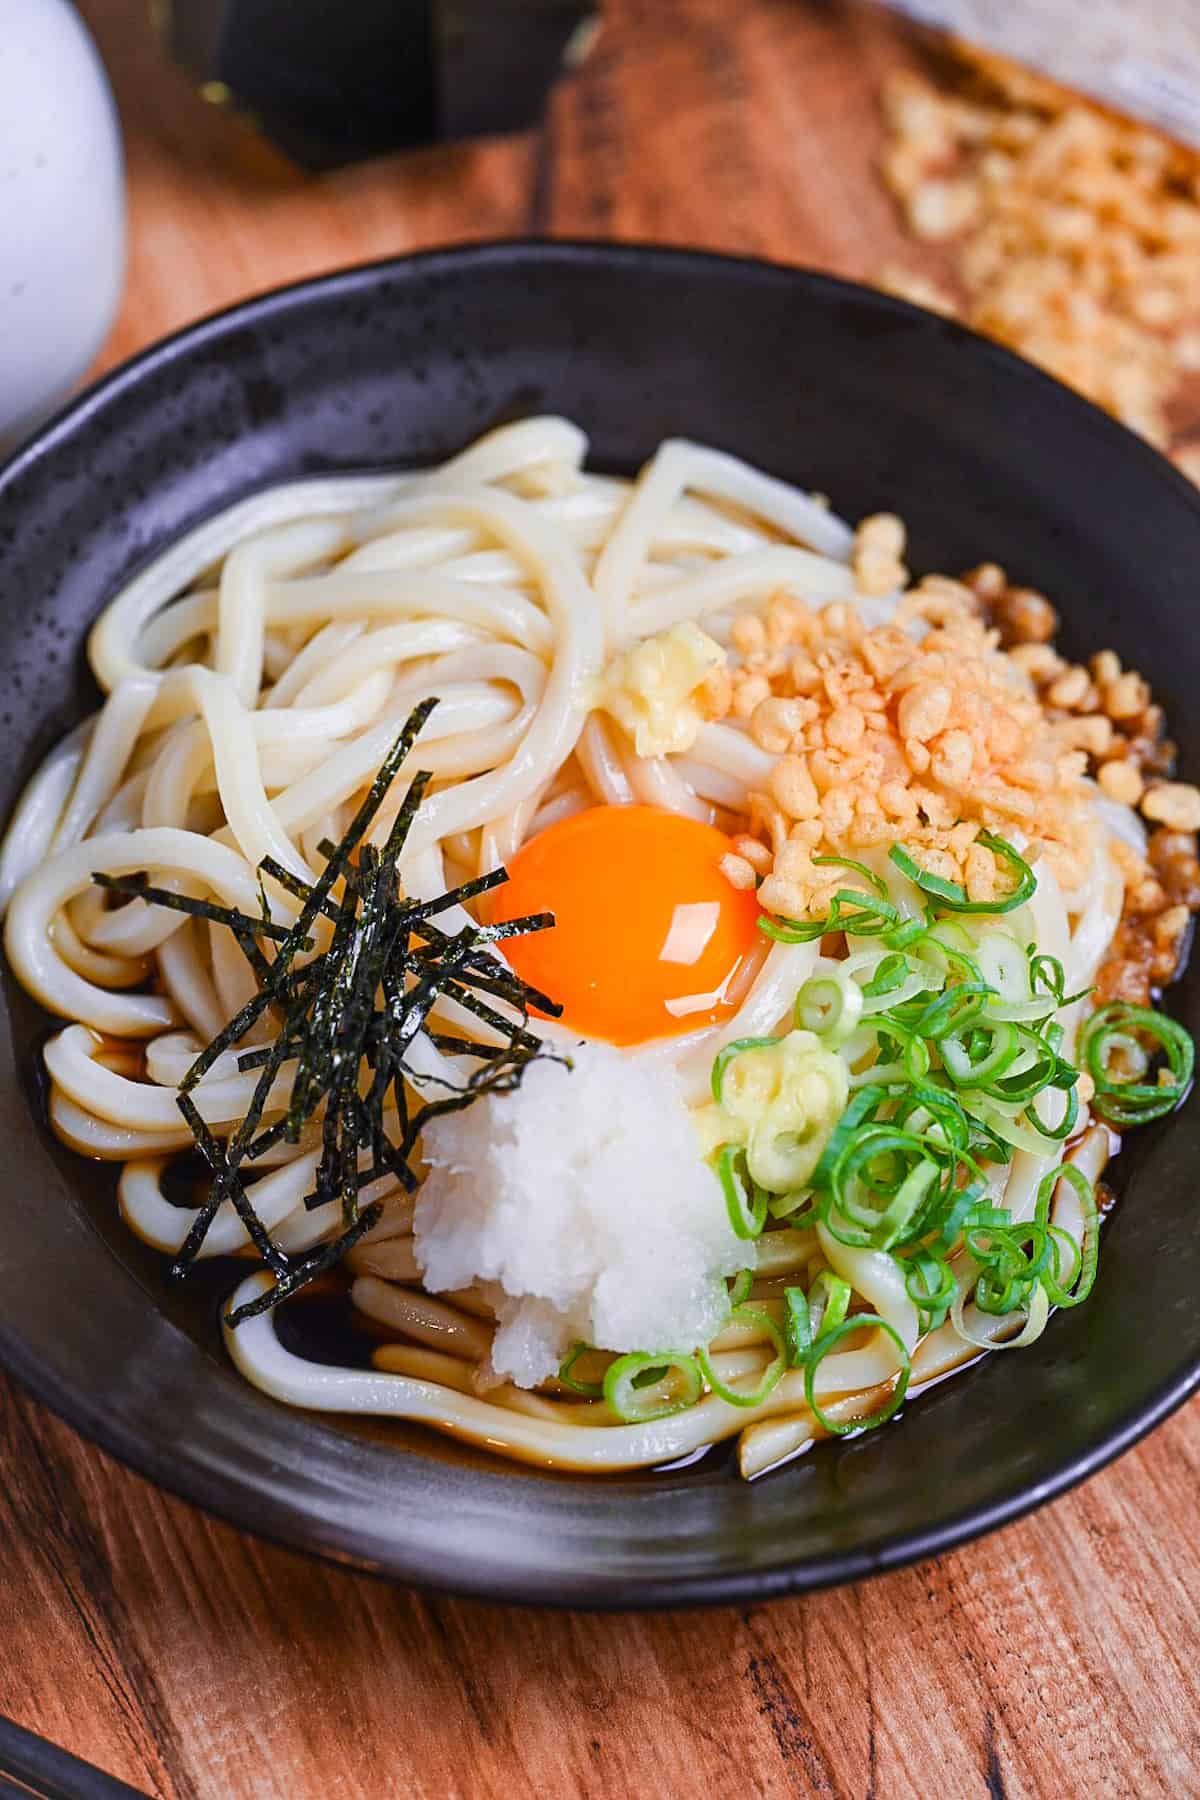 Chilled bukkake udon in a black dish topped with tempura bits, chopped green onion, grated daikon, shredded nori and an egg yolk close-up vertical